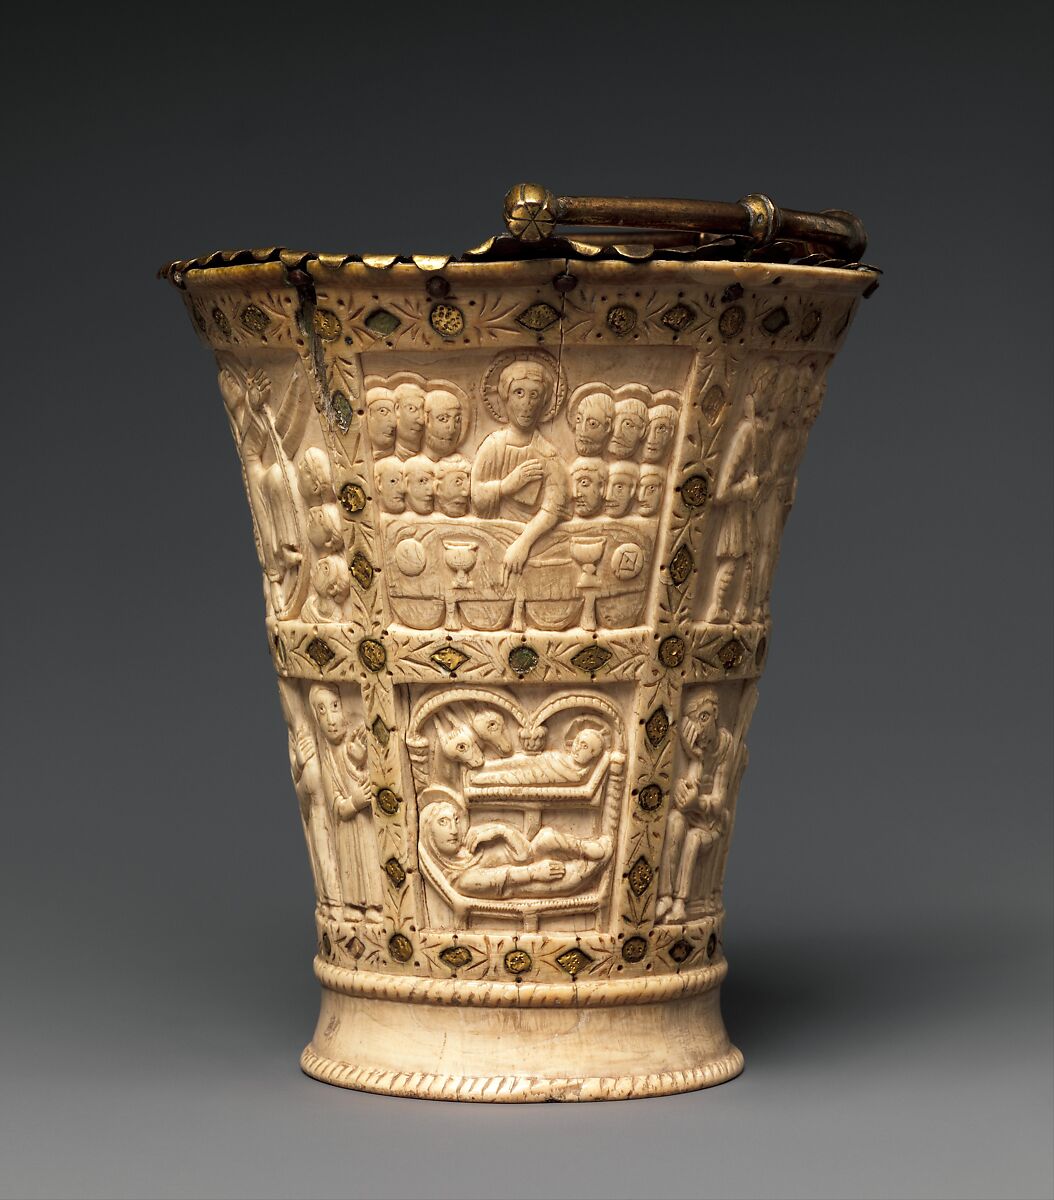 Situla (Bucket for Holy Water)